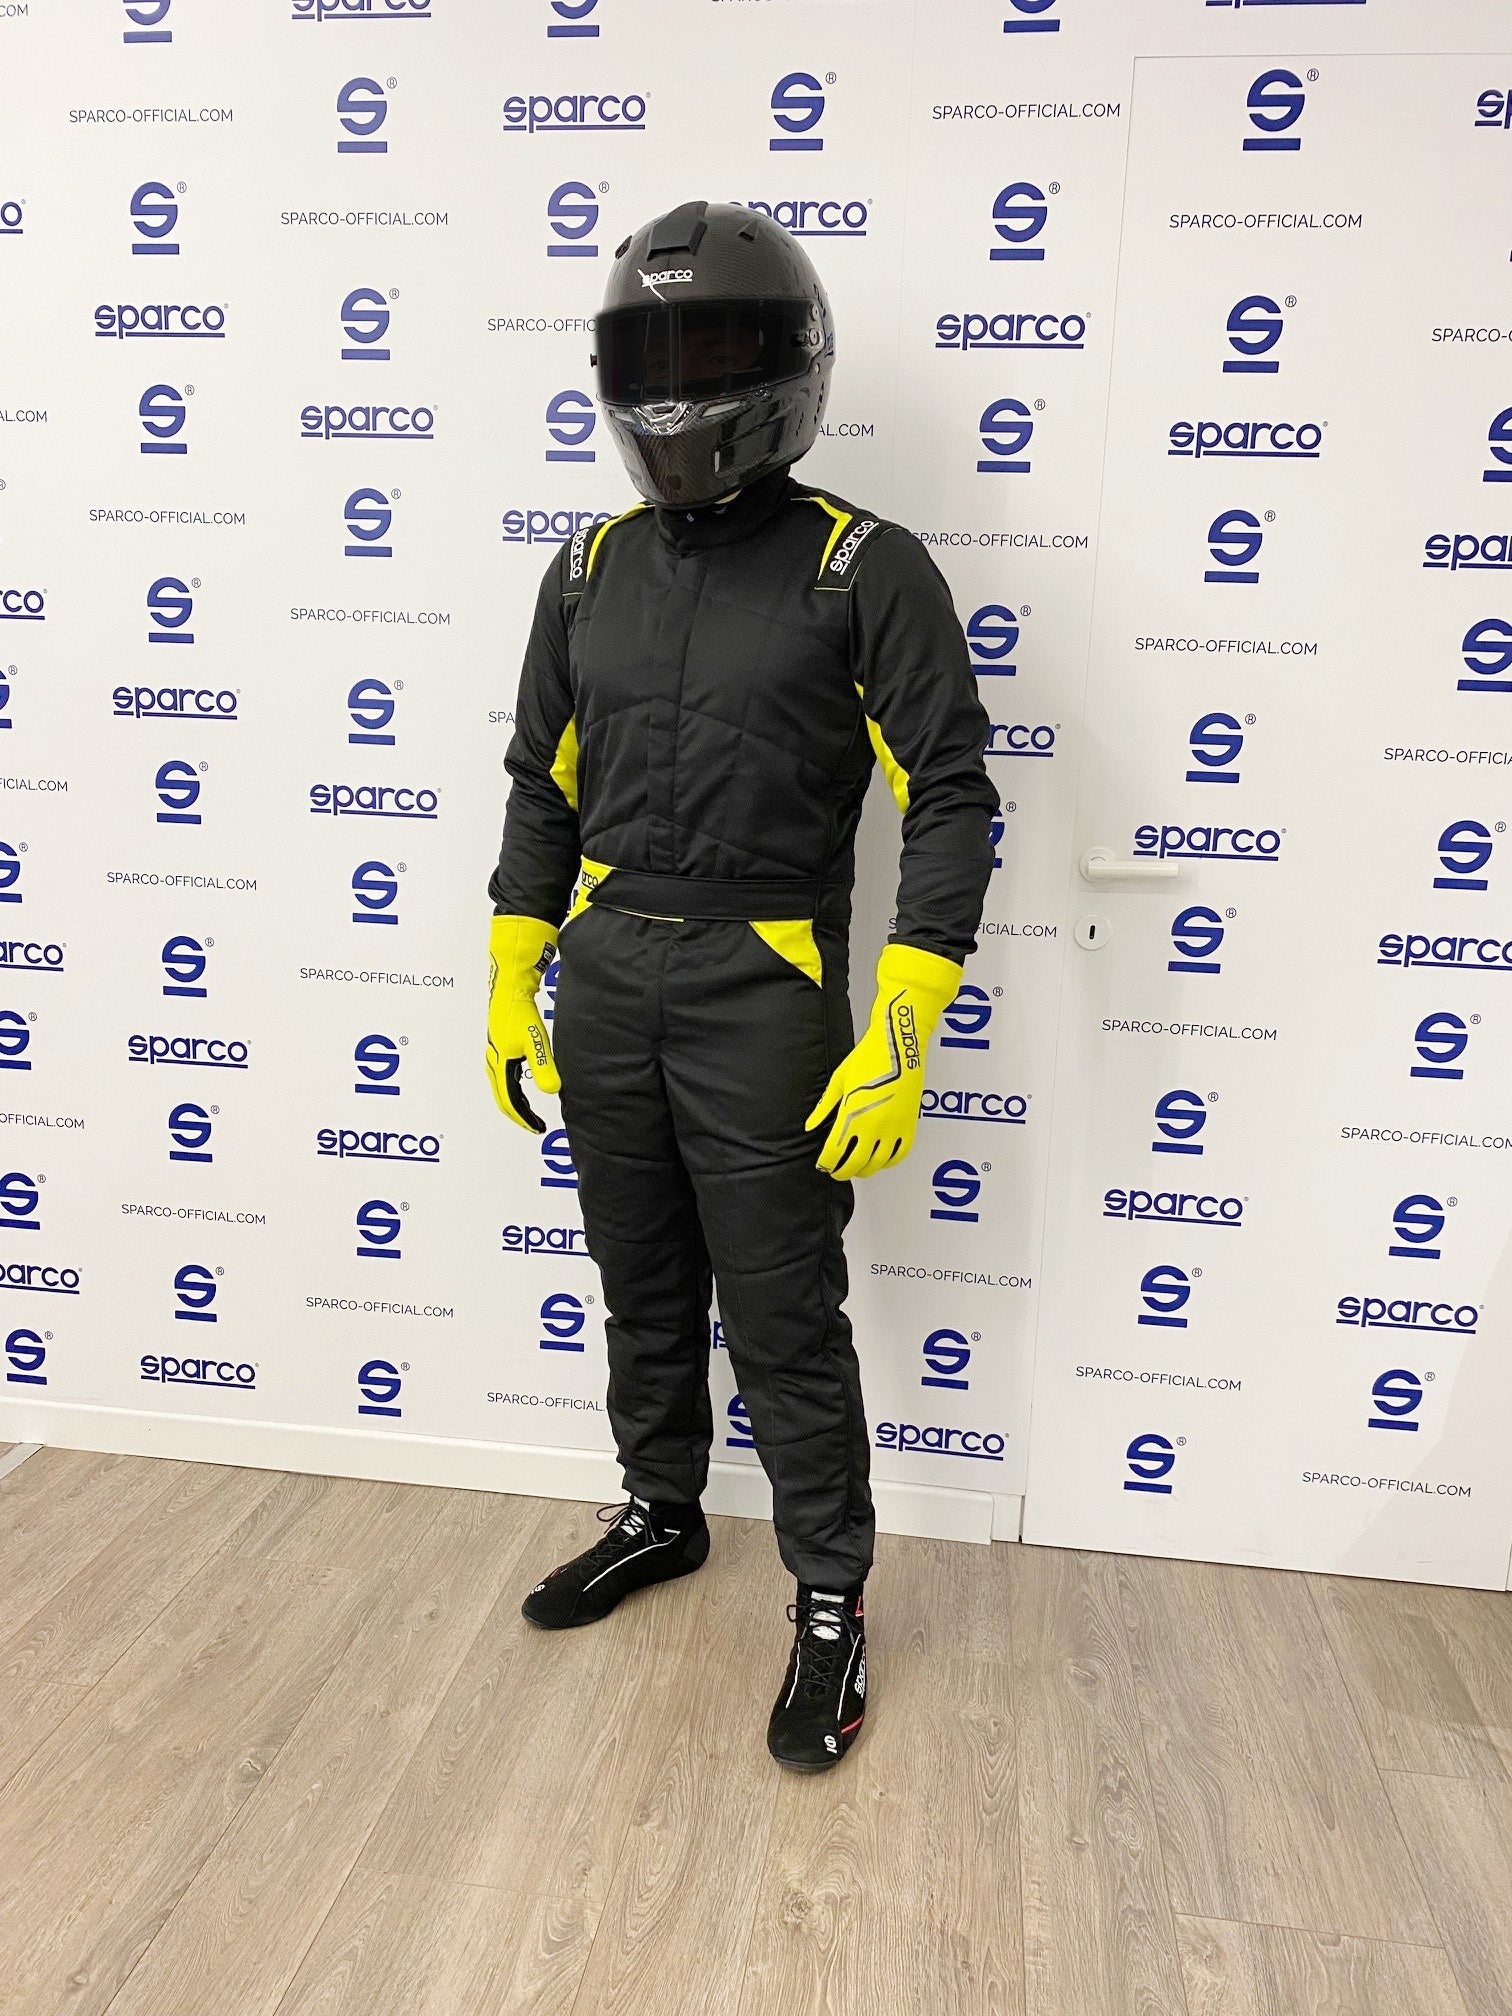 SPARCO 00109354NRGF SPRINT 2022 Racing suit, FIA 8856-2018, black/yellow, size 54 Photo-1 